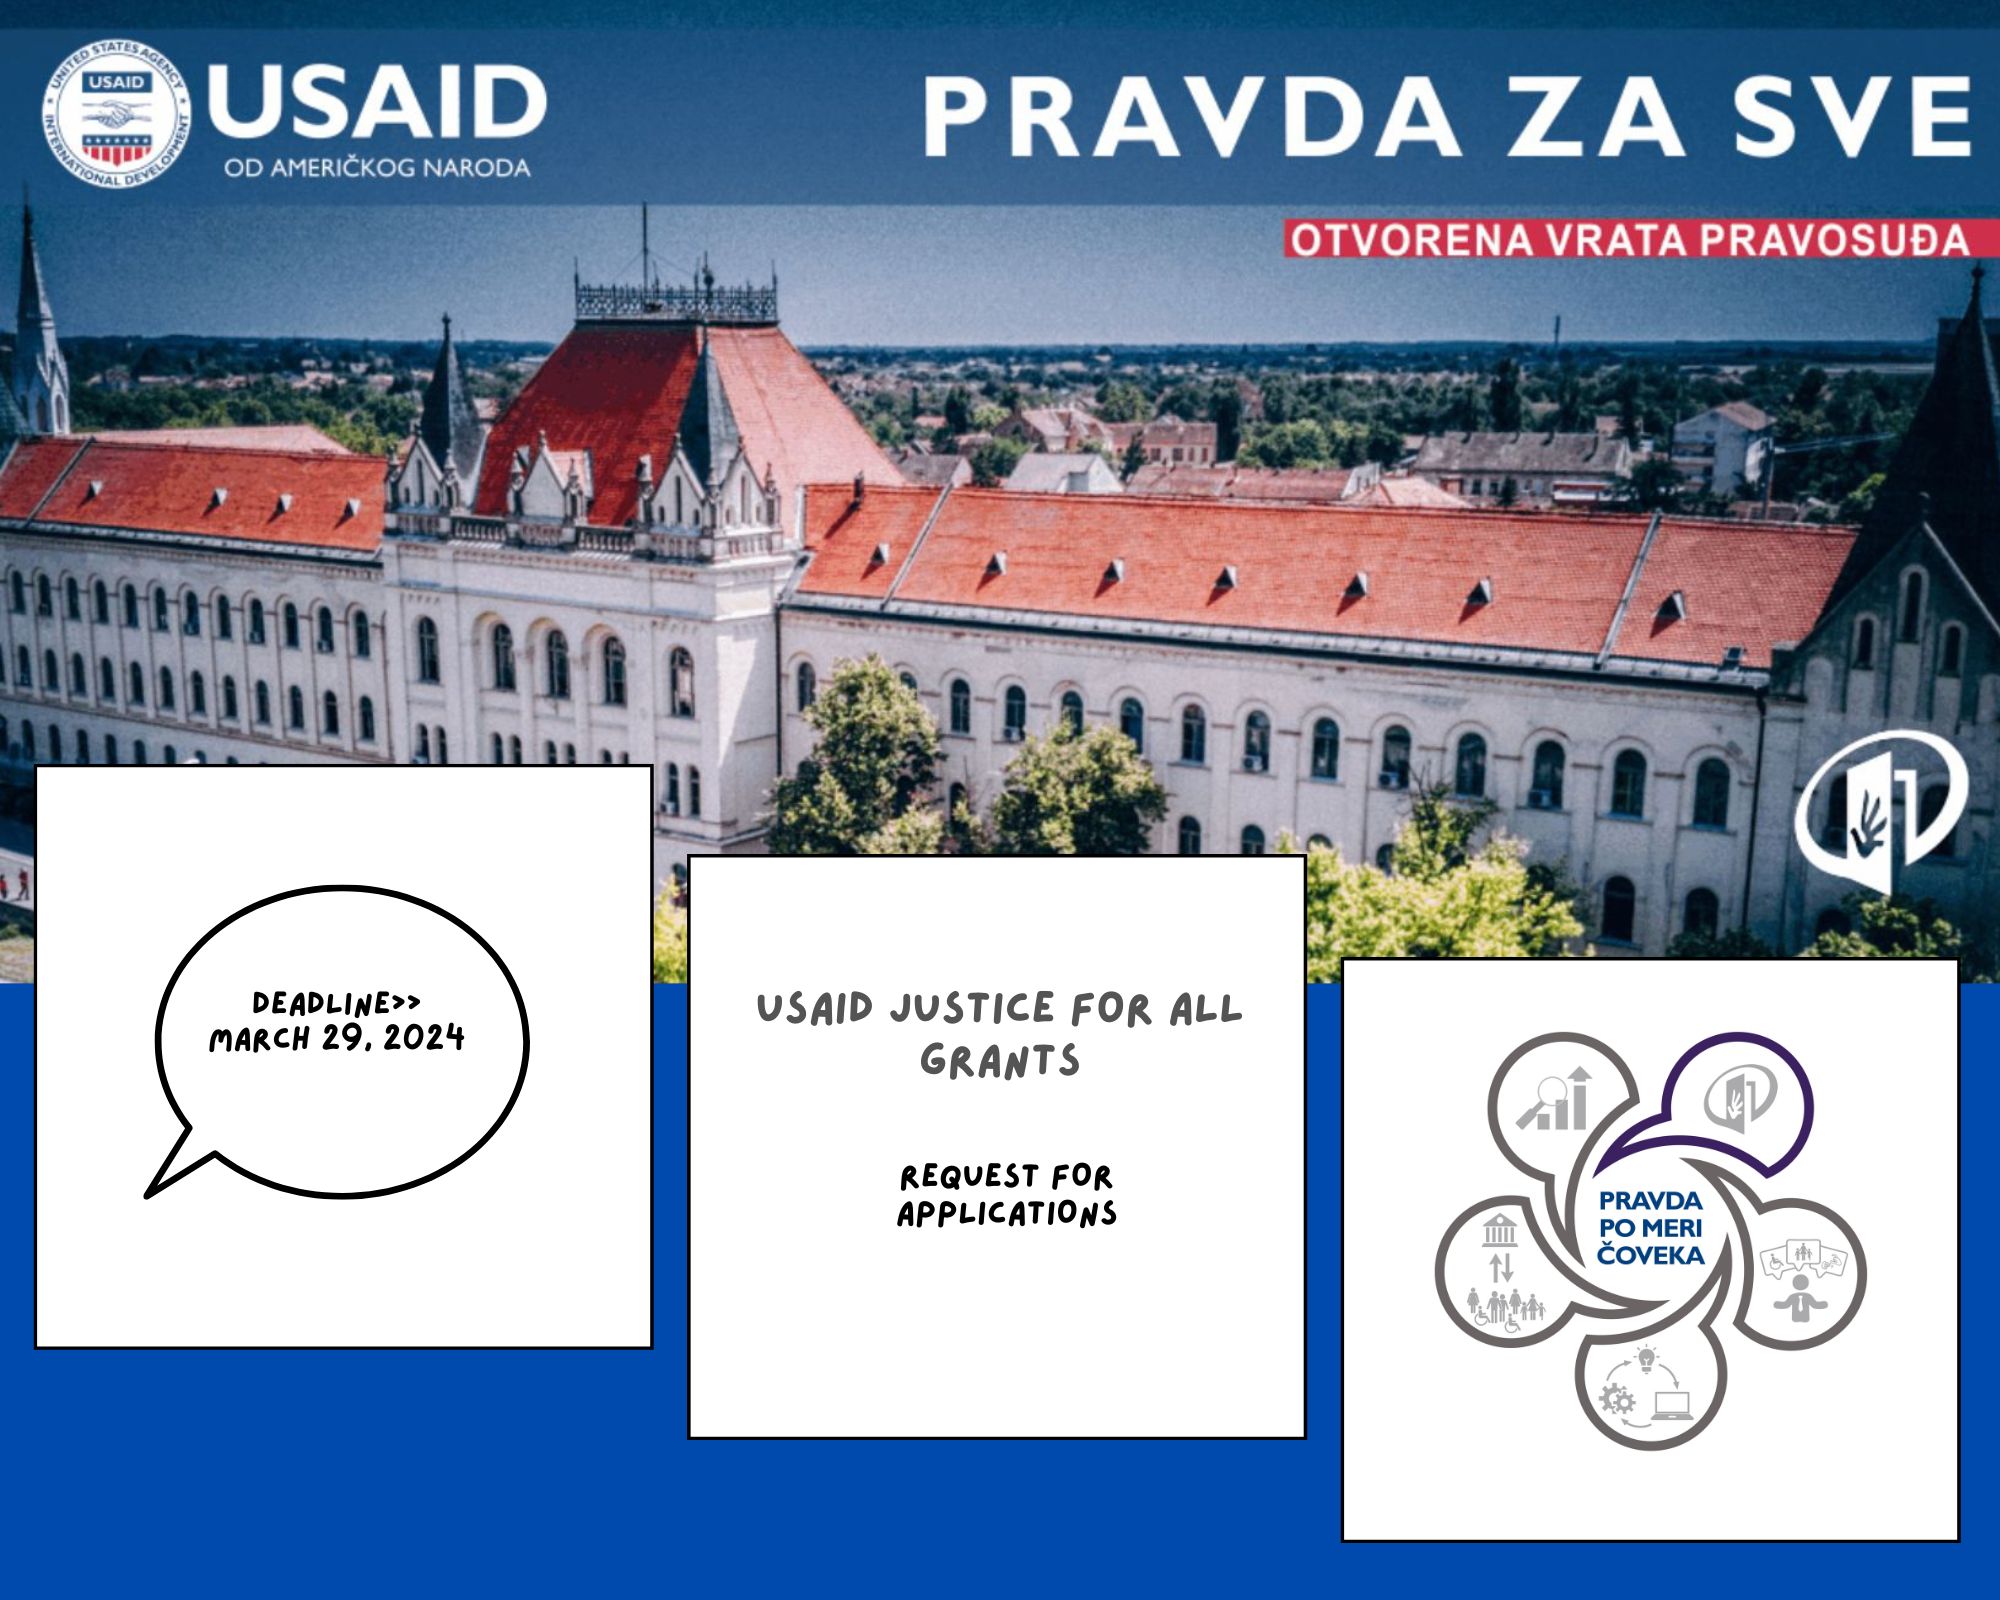 Small Grants for Promoting People-Centered Justice for Underserved and Disadvantaged Communities in Serbia